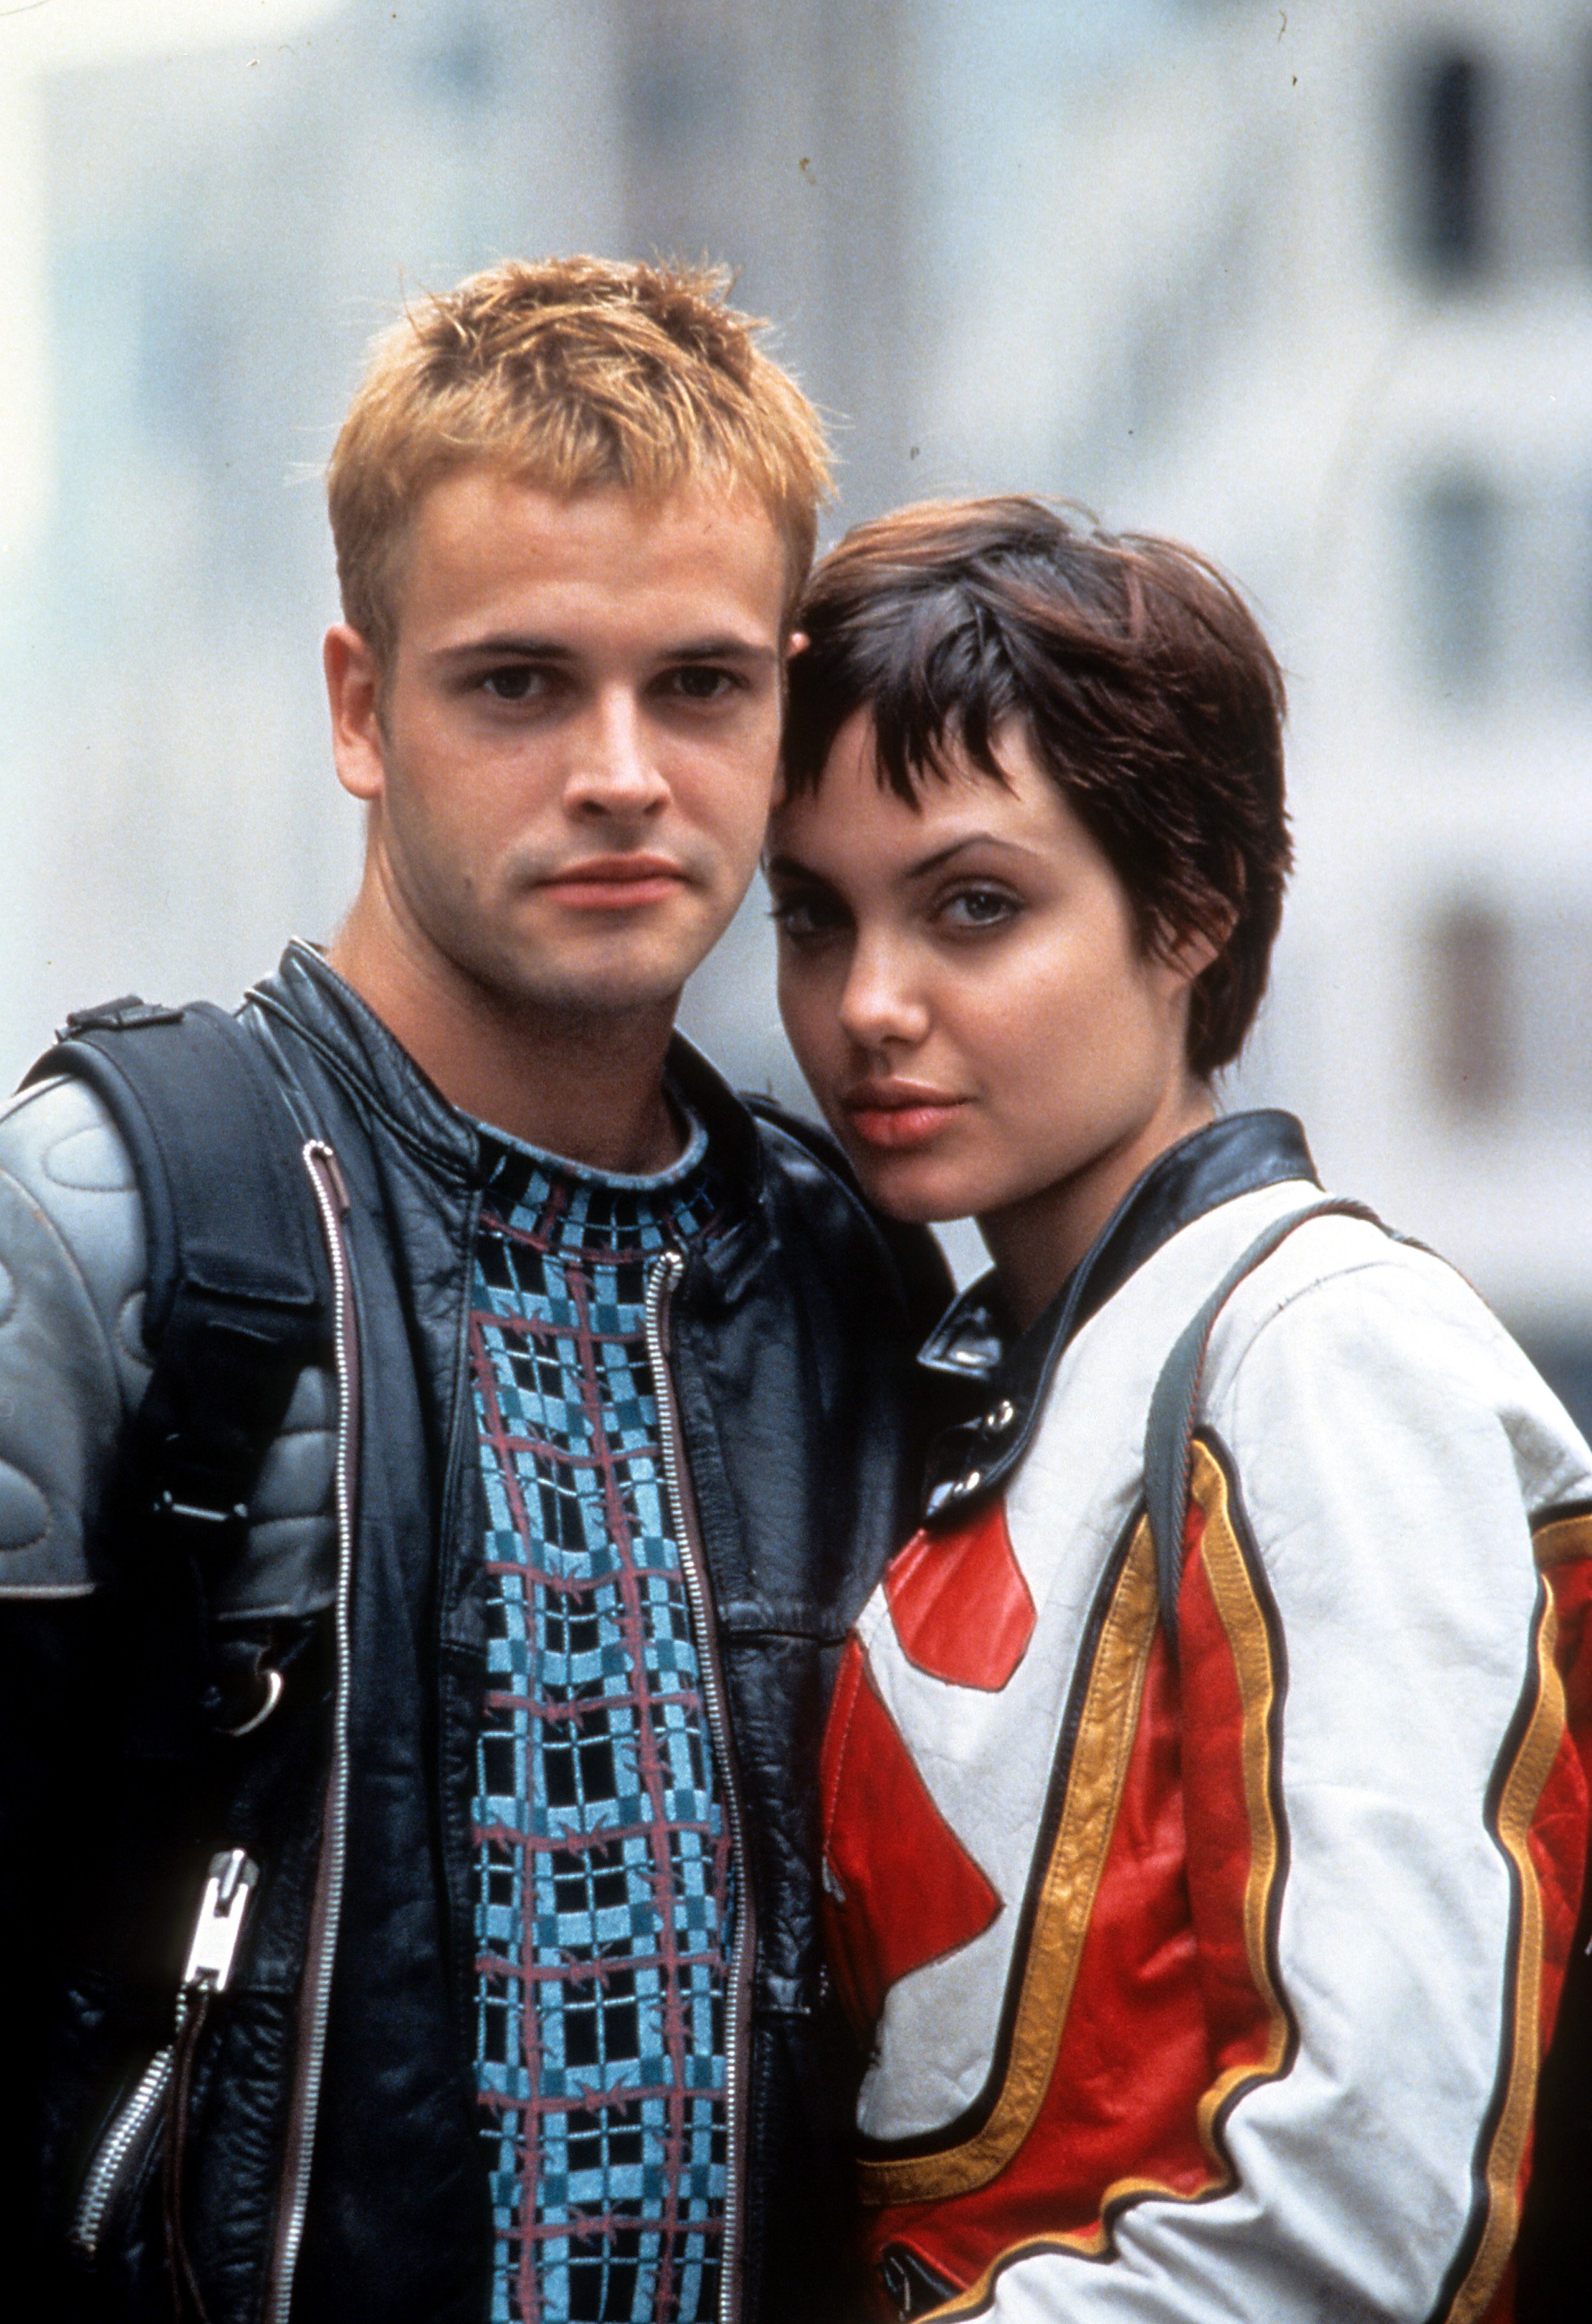 Jonny Lee Miller and Angelina Jolie in a scene from the film 'Hackers', 1995 | Source: Getty Images